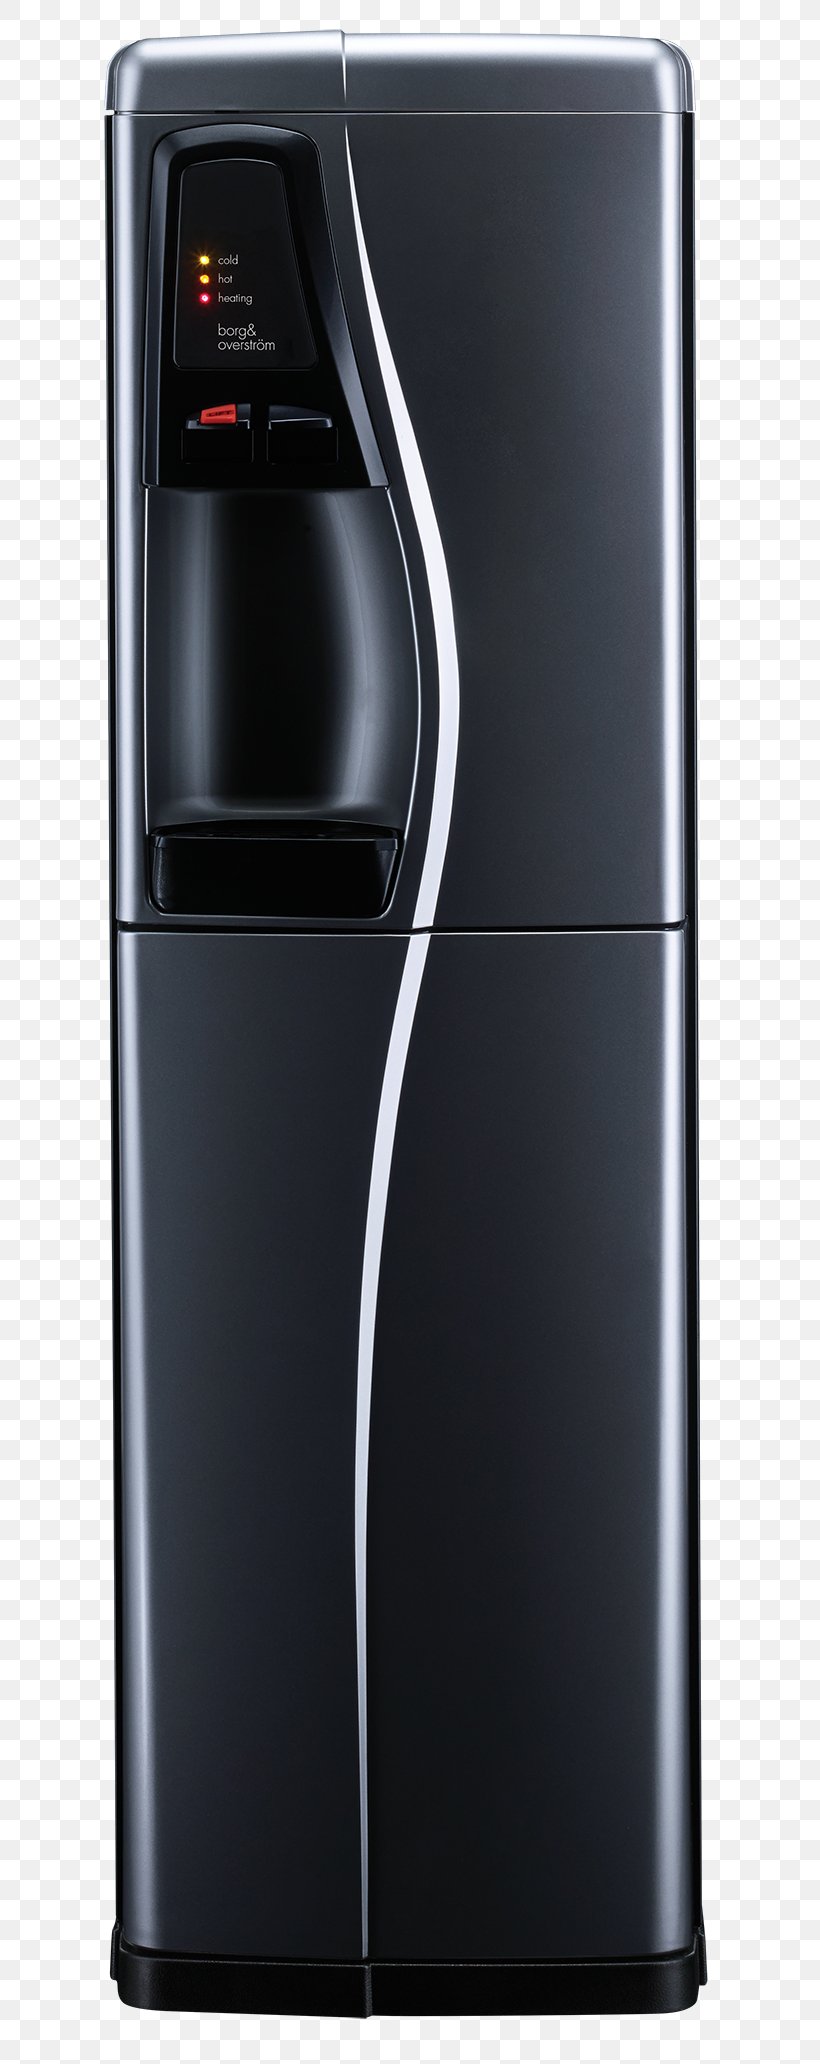 Water Cooler Water Filter Home Appliance Filtration, PNG, 680x2064px, Water Cooler, Computer Appliance, Filtration, Home, Home Appliance Download Free